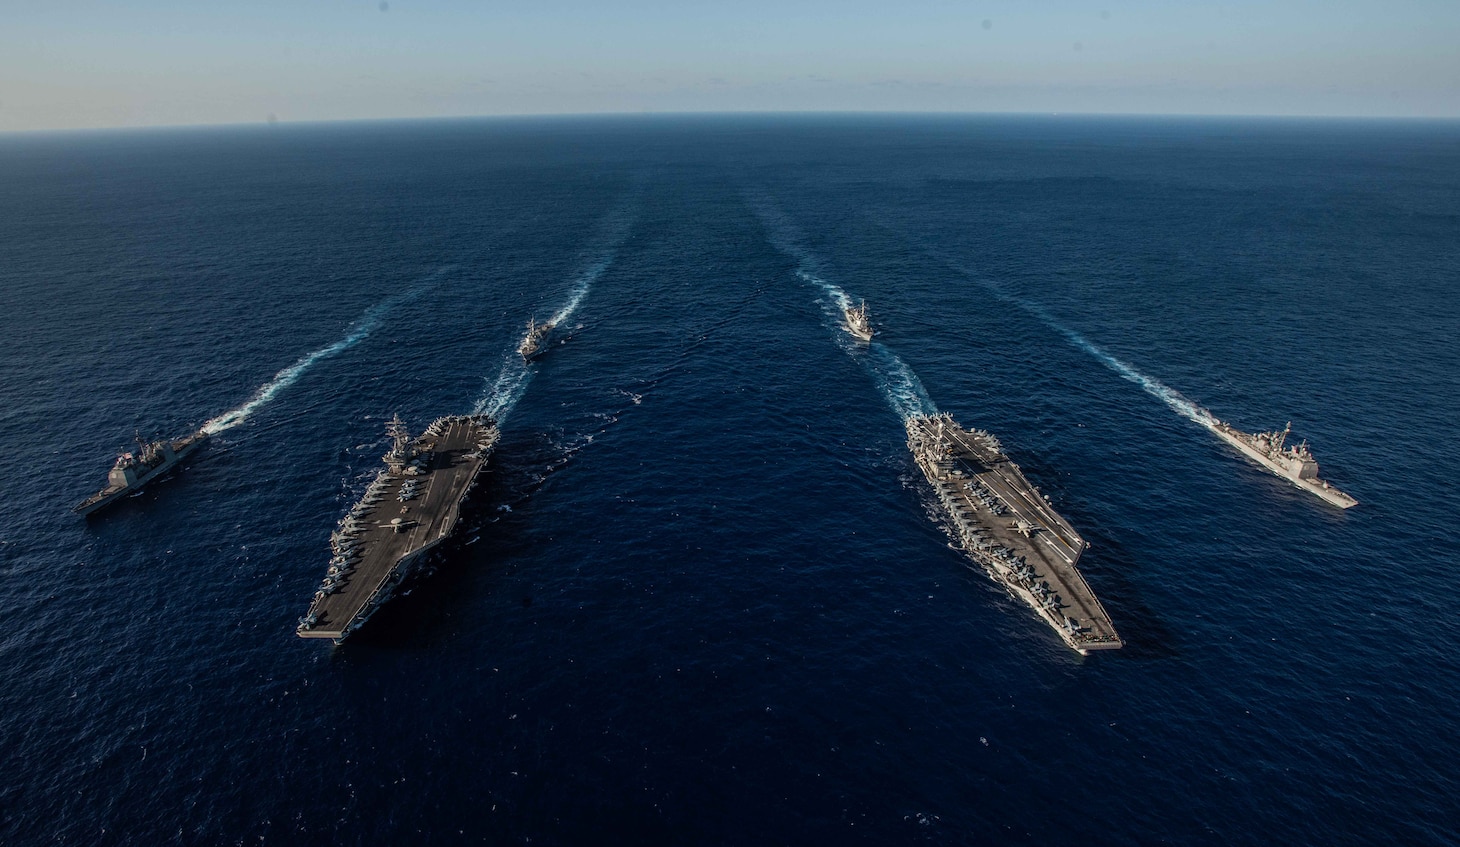 PHILIPPINE SEA (Nov. 16, 2018) Ships with the Ronald Reagan Carrier Strike Group and John C. Stennis Carrier Strike Group transit the Philippine Sea during dual carrier operations. Ronald Reagan and John C. Stennis are underway and conducting operations in international waters as part of a dual carrier strike force exercise. The U.S. Navy has patrolled the Indo-Pacific region routinely for more than 70 years promoting regional security, stability and prosperity.